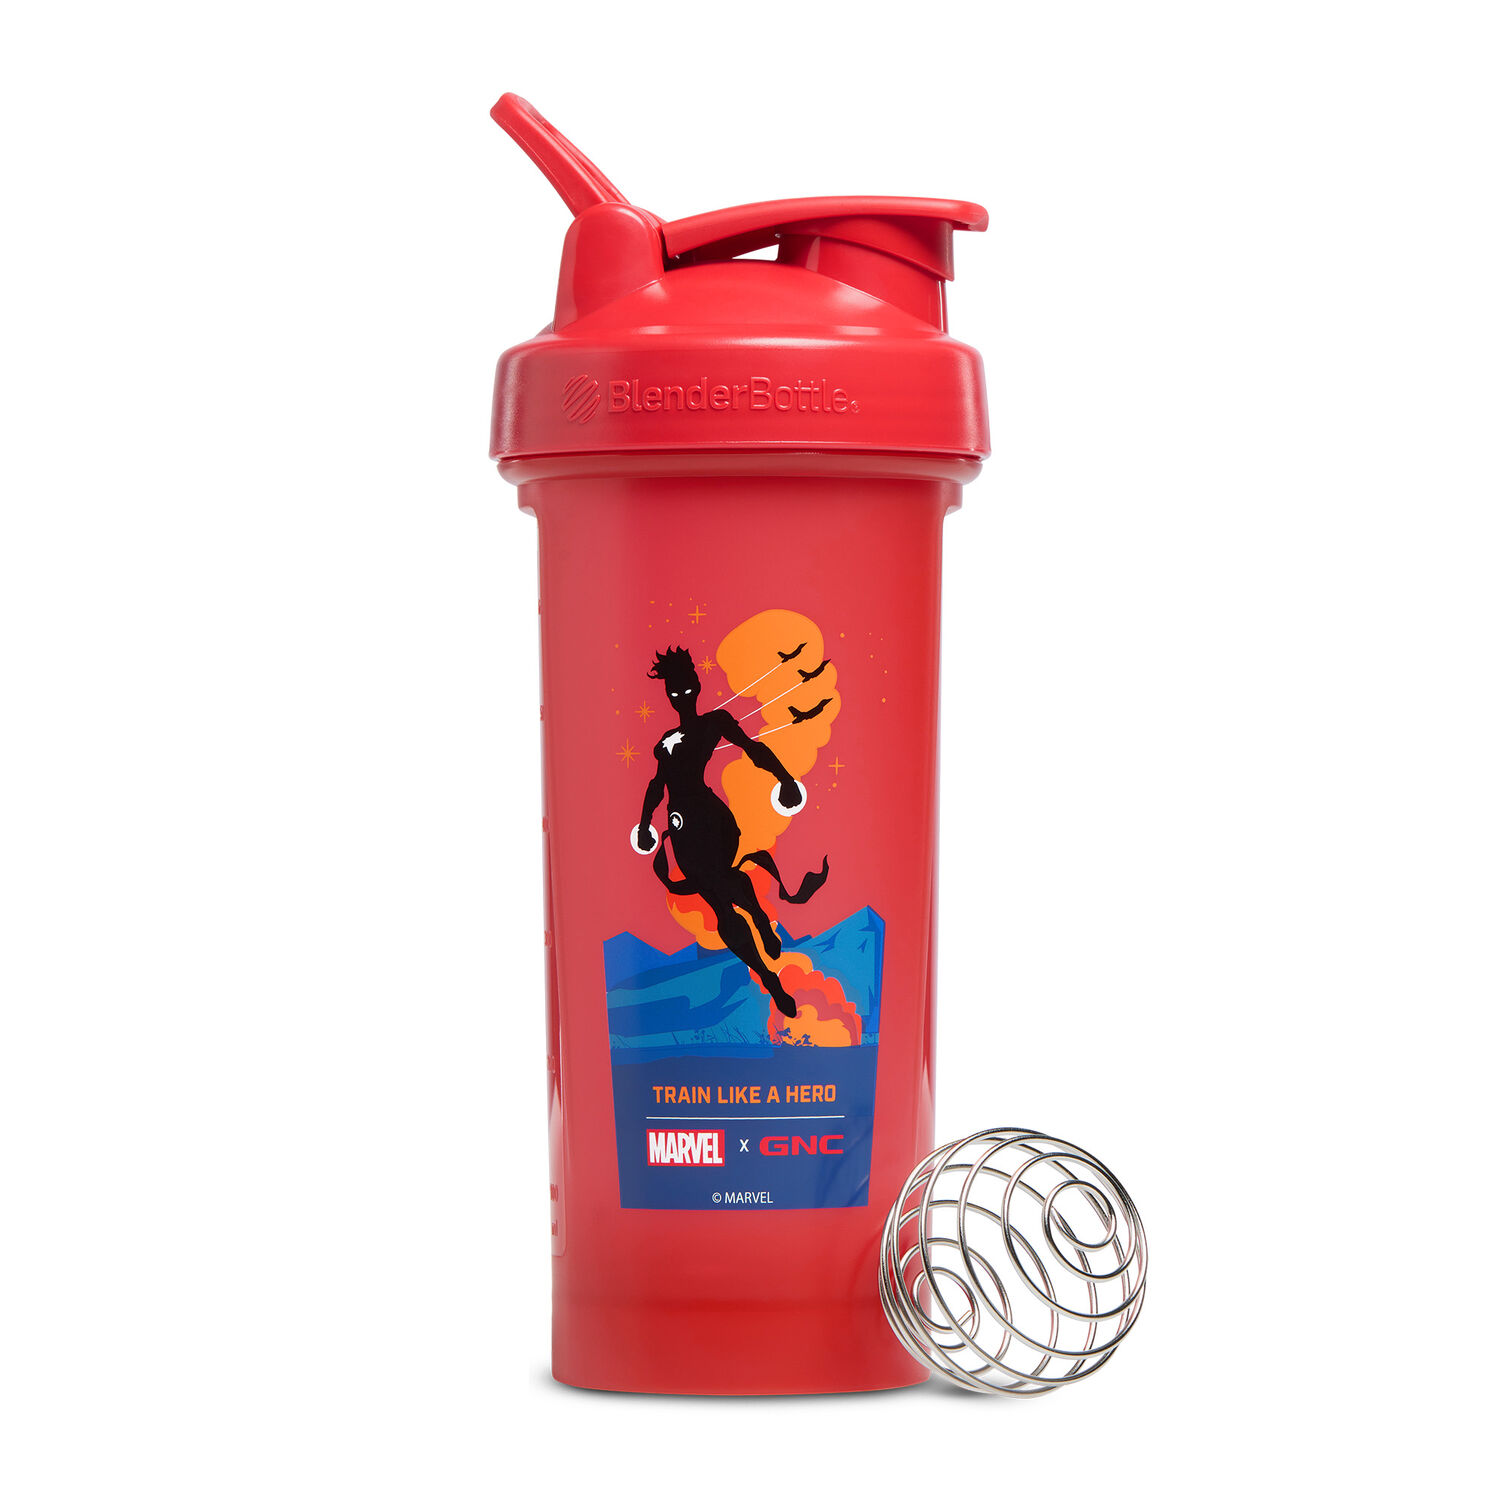 Blender Bottle Classic 20 oz. Shaker with Loop Top - Clear/Red